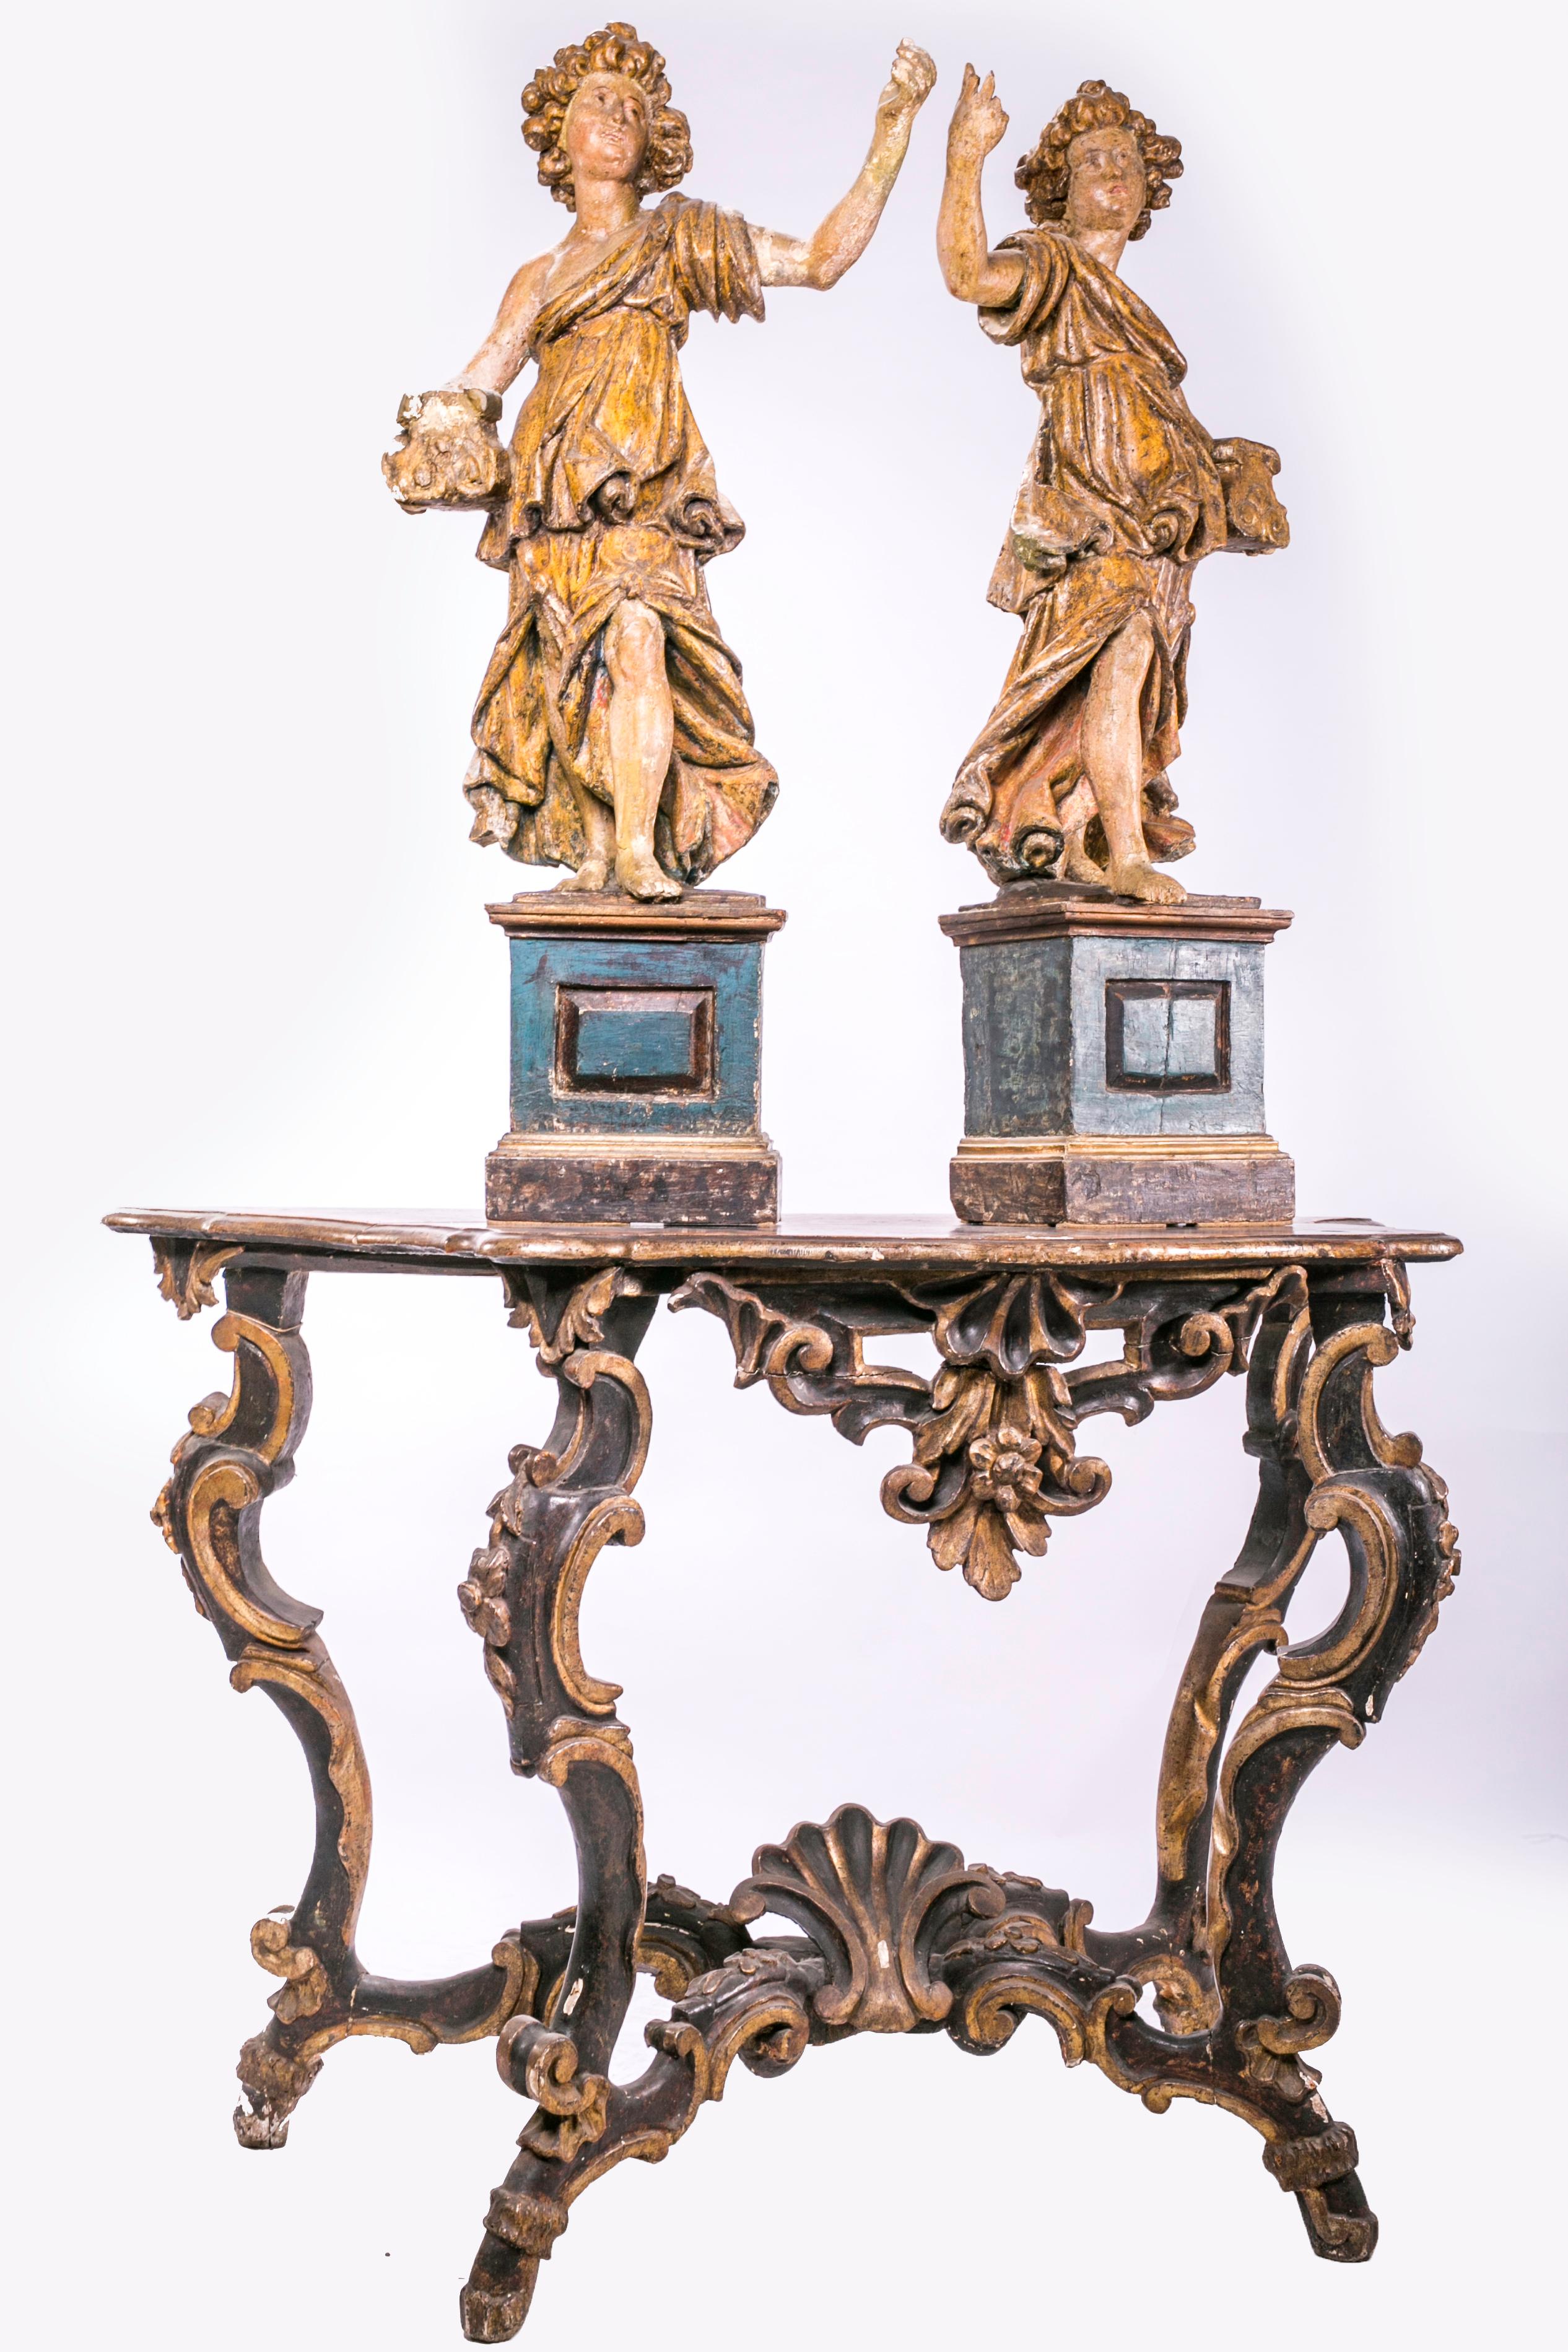 Carved and lacquered angels from the 1700s. 
Angels all original, never restored.

Wood carvings in the round, carved, lacquered and gilded with 